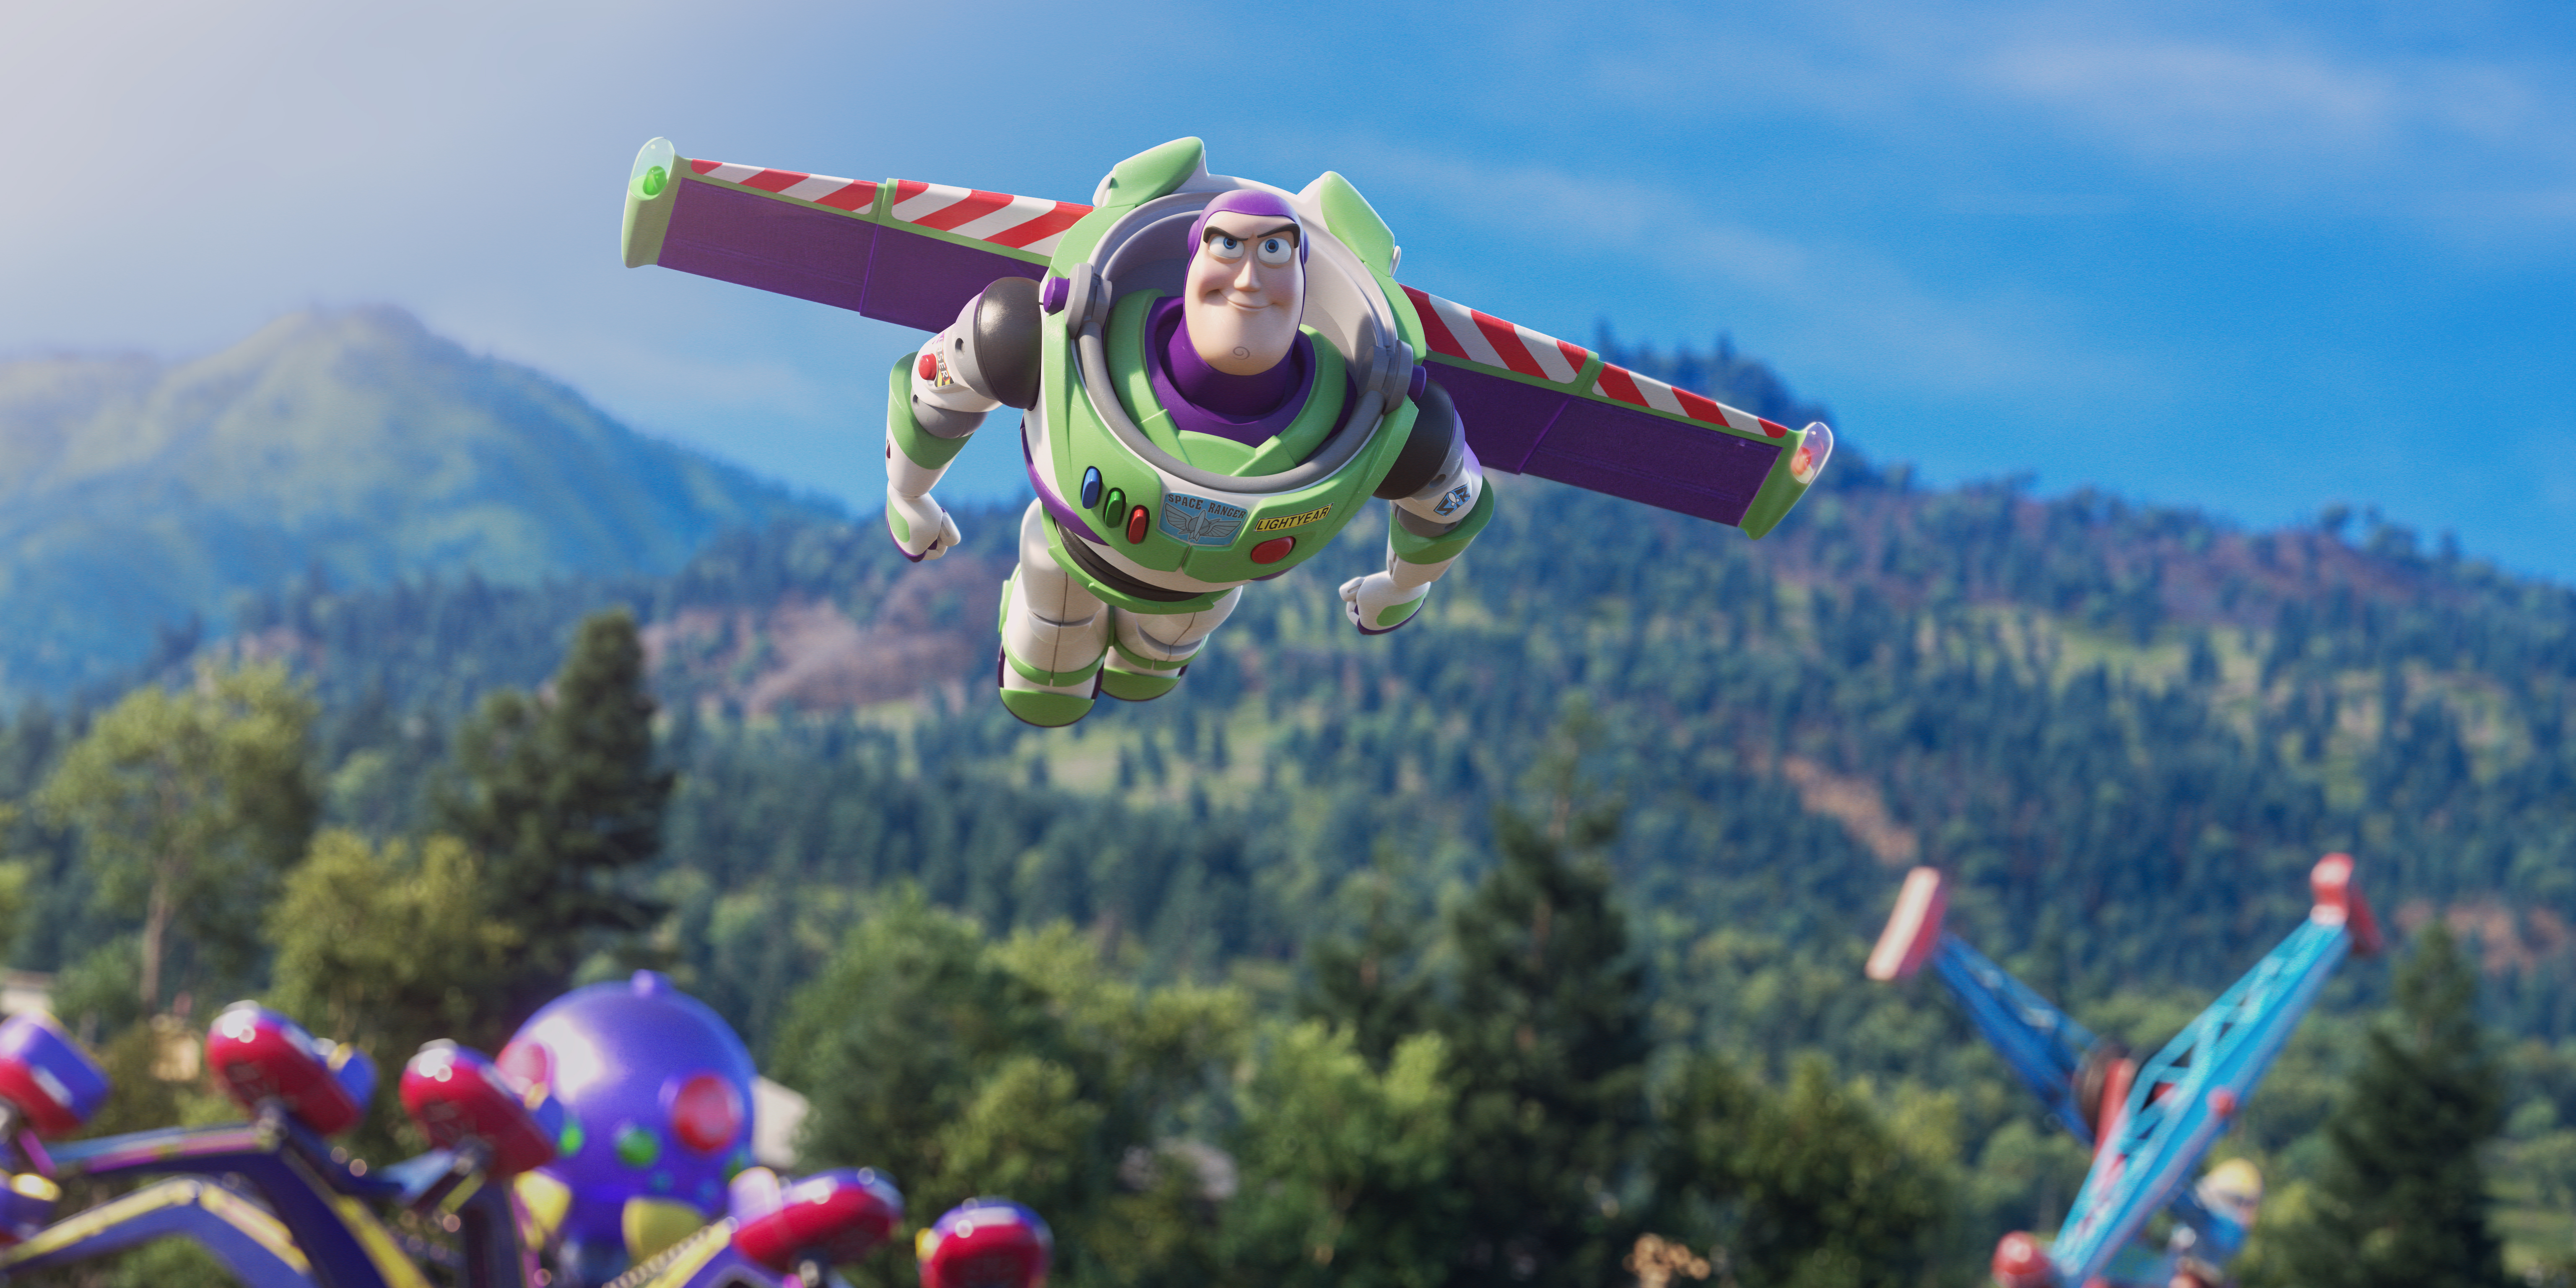 Download Buzz Lightyear wallpapers for mobile phone free Buzz Lightyear  HD pictures